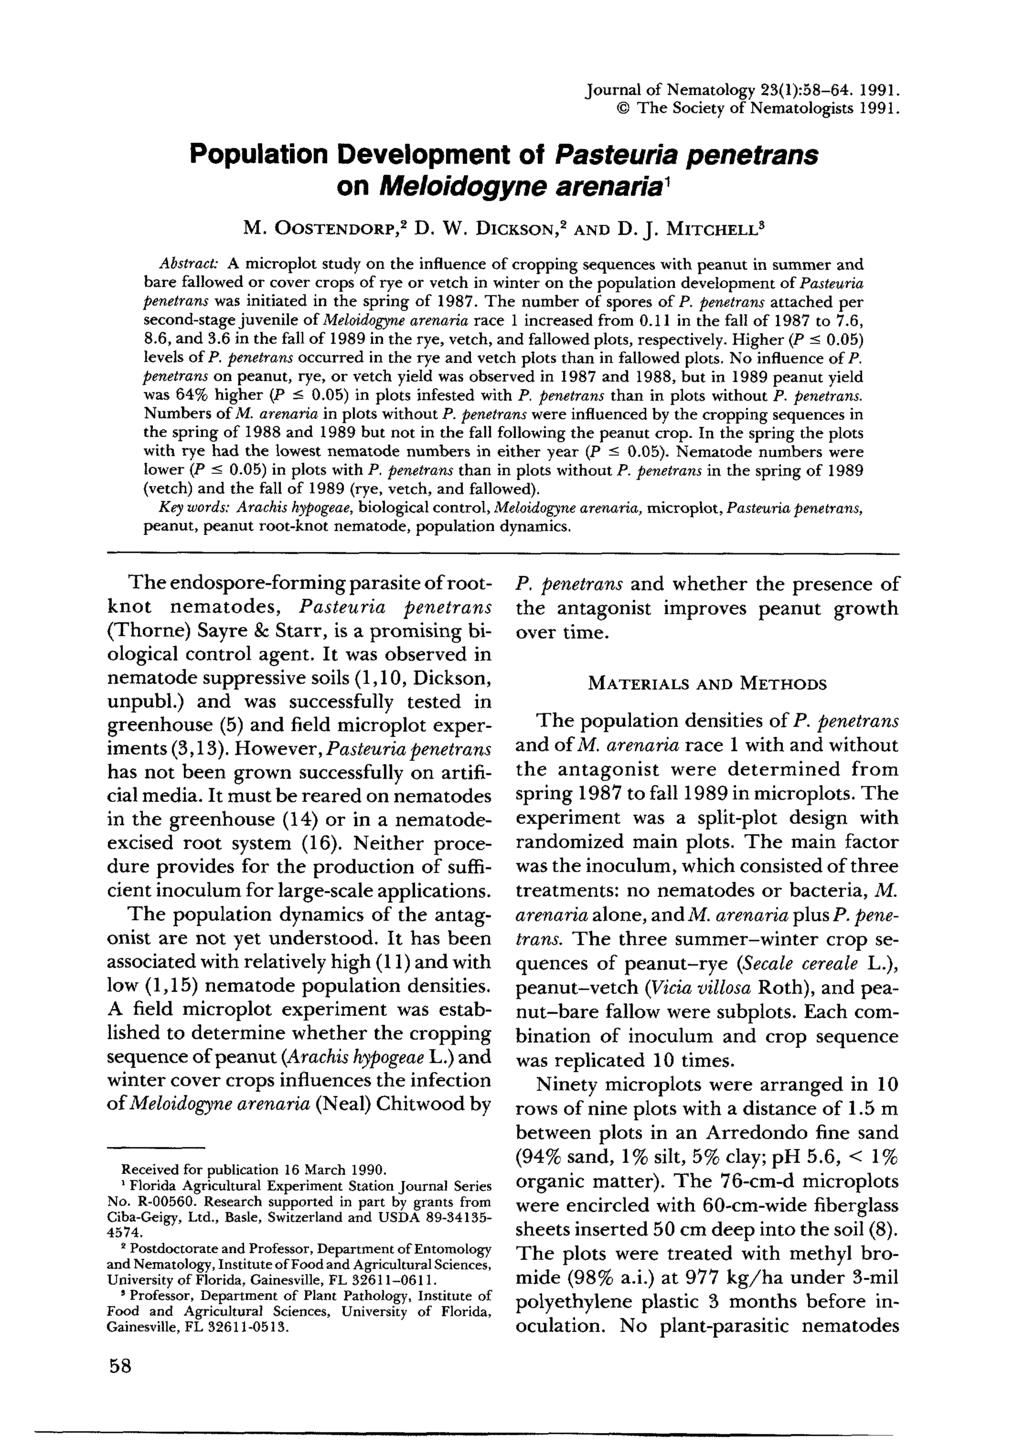 Journal of Nematology 23(1):58-64. 1991. The Society of Nematologists 1991. Population Development of Pasteuria penetrans on Meloidogyne arenaria 1 M. OOST~NDORP, 2 D. W. DICKSON, ~ AND D.J. MITCHELL